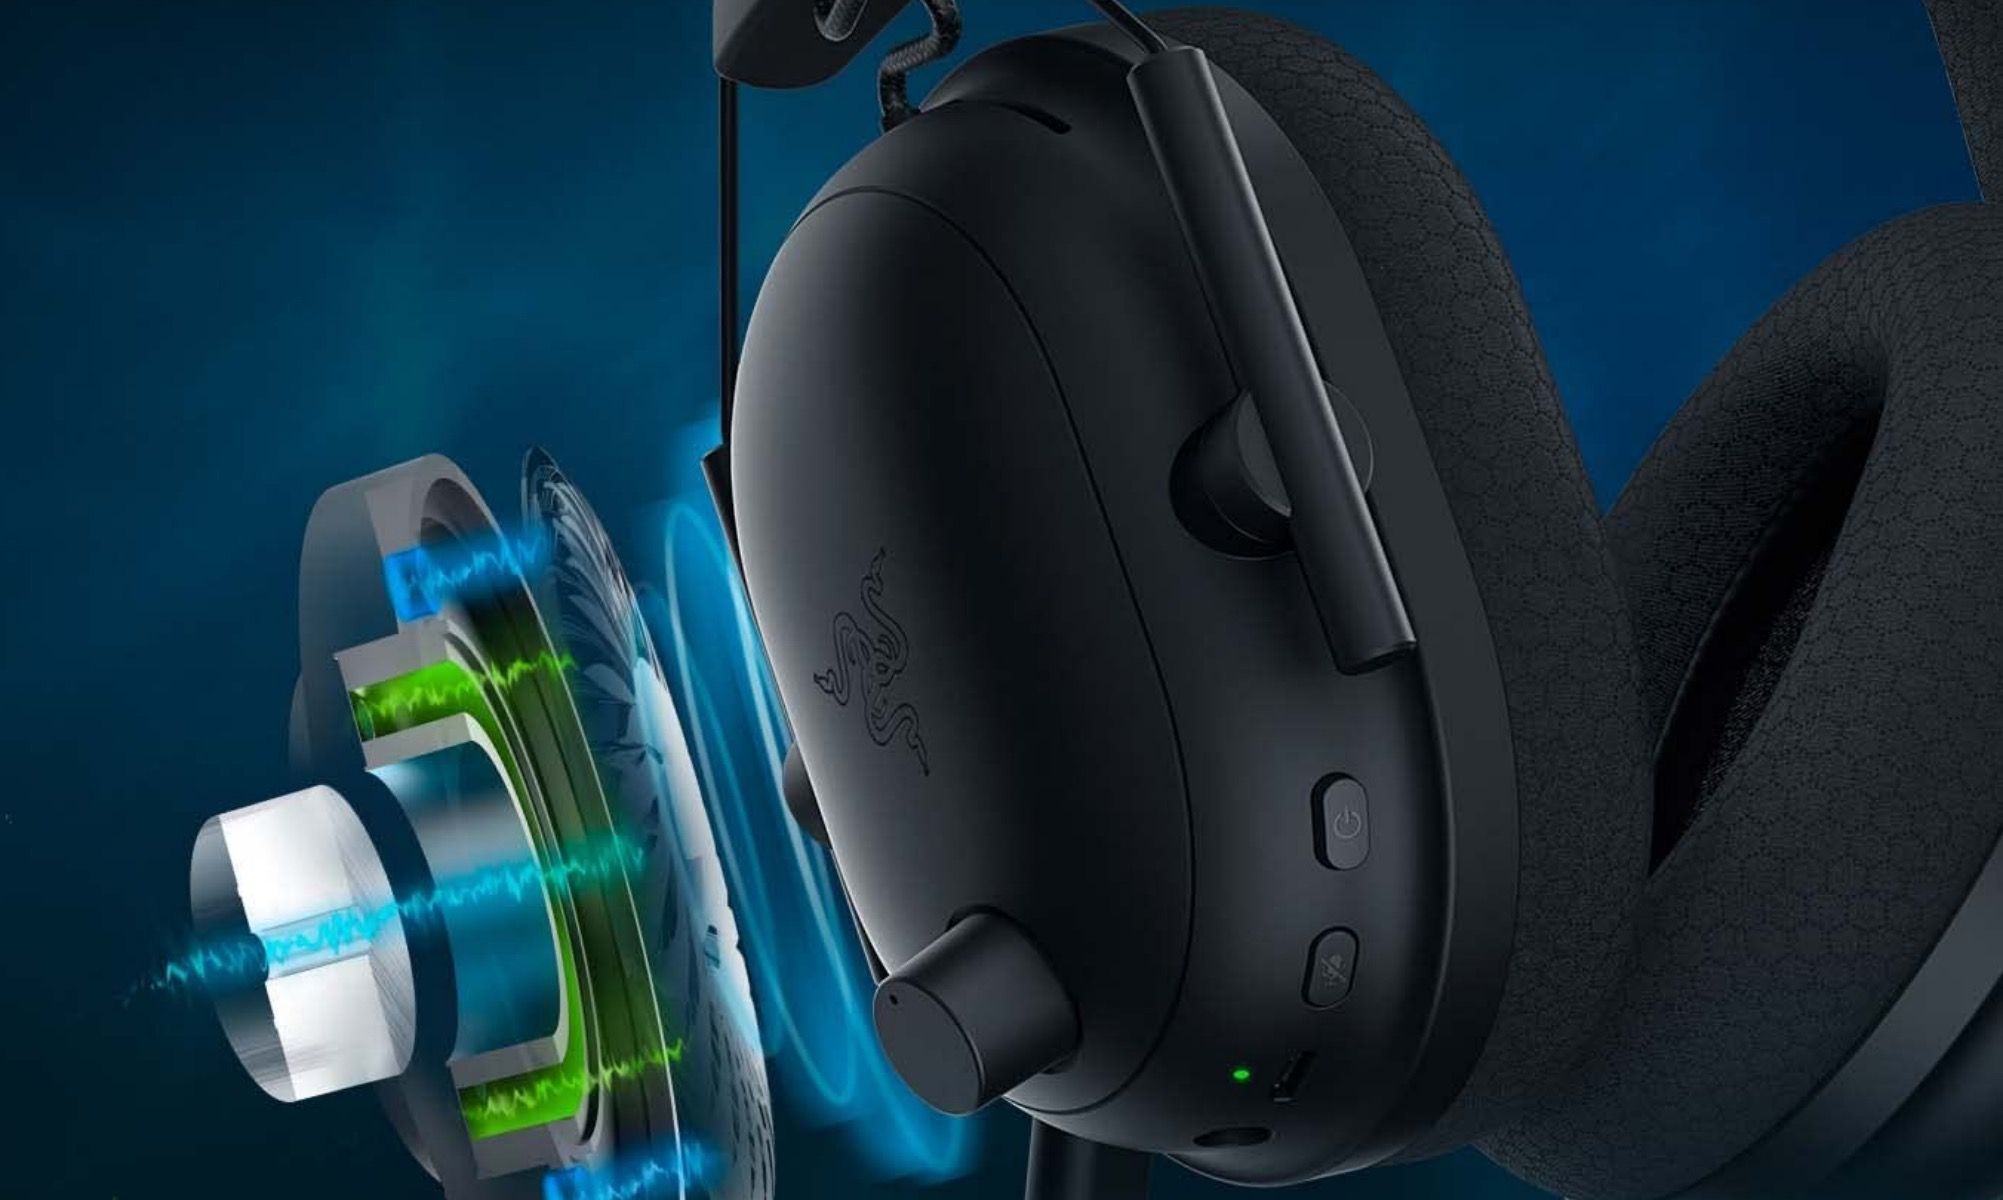 A colorful and vibrant image showing the interior design of the ear of a Razer BlackShark V2 gaming headphone set